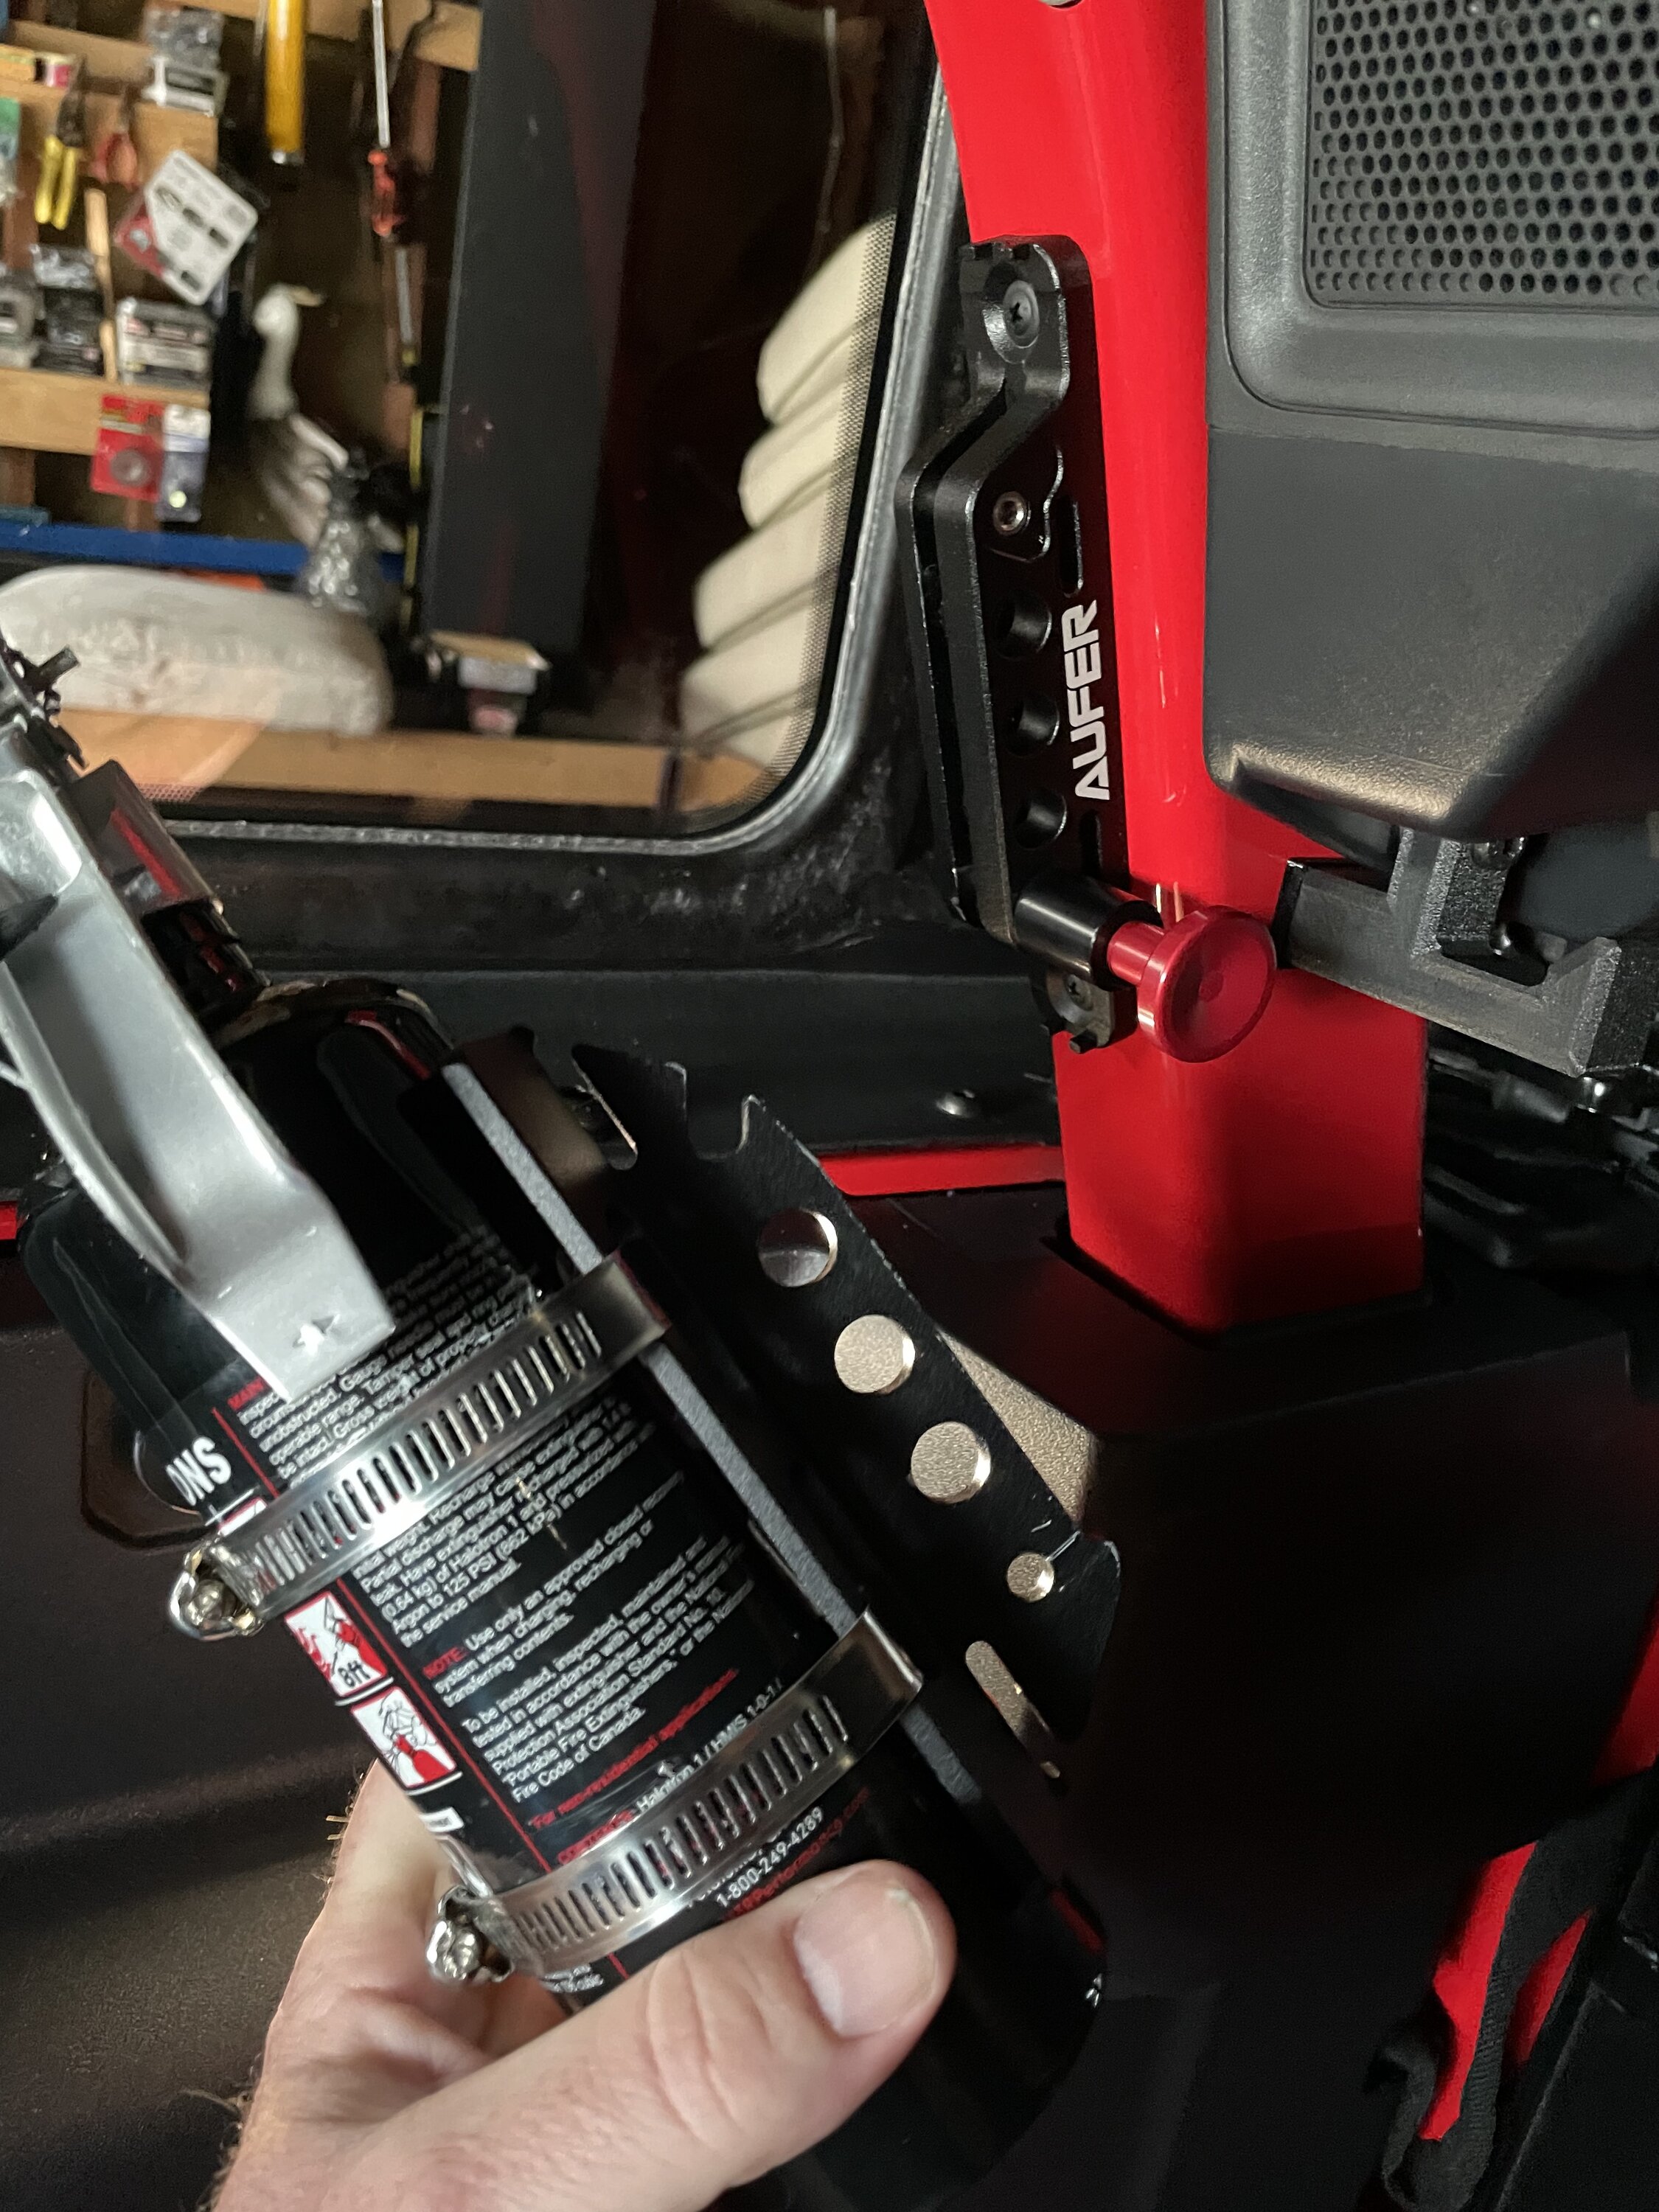 Ford Bronco Fire Extinguisher Mounting in the Bronco - Show Your Installs 59E34ECC-4ADE-4C44-A017-C0DB00BE42CD